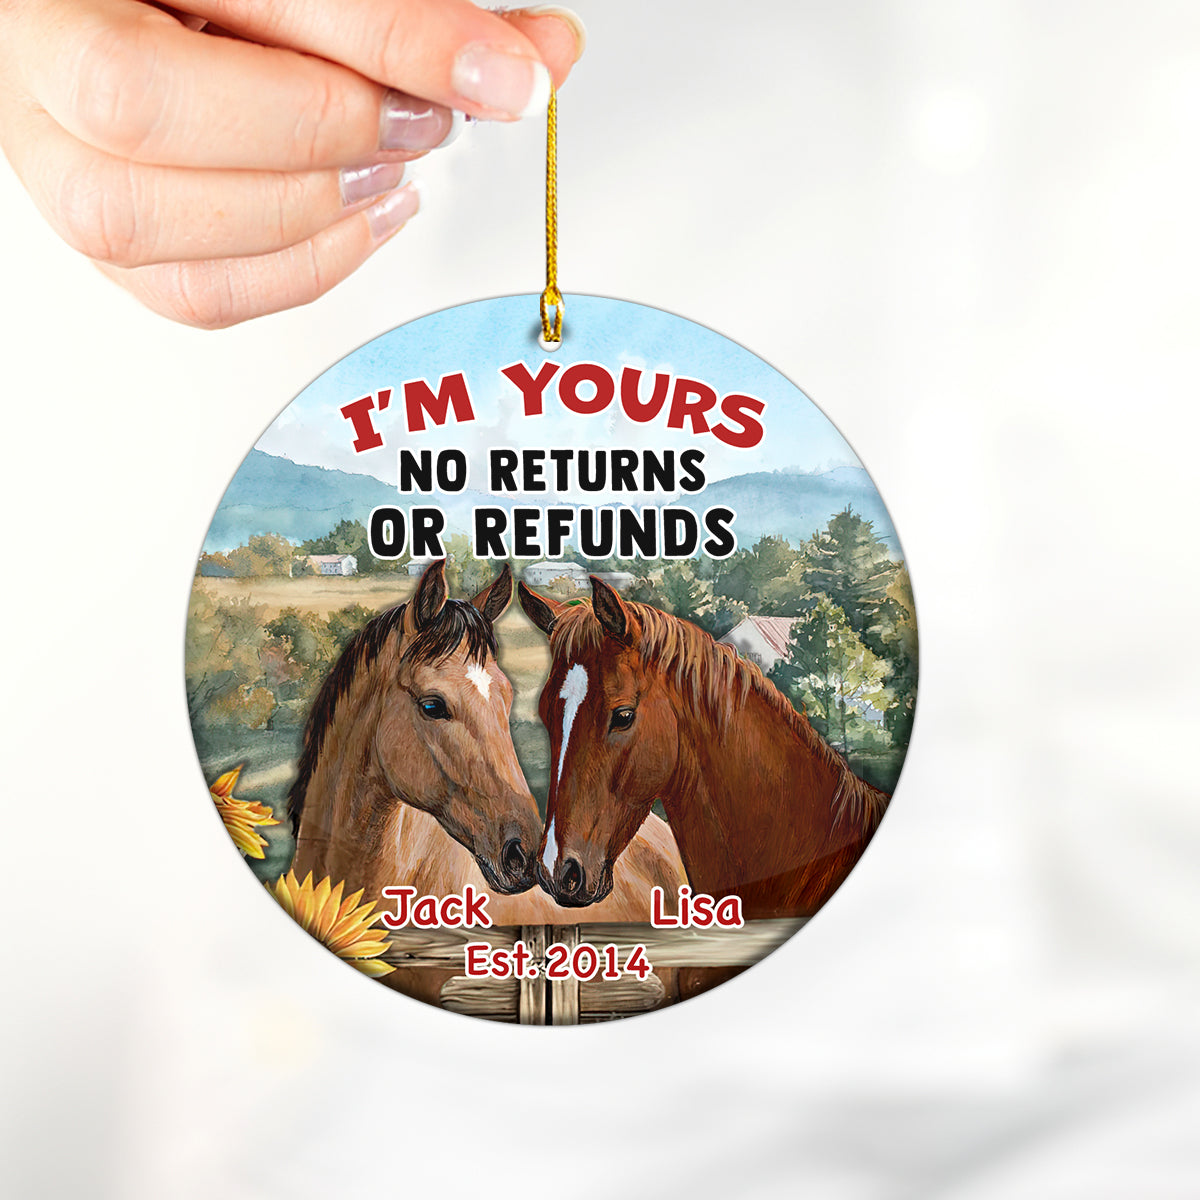 I'm Your No Returns Or Refunds Personalized Circle Ornament Christmas Gift For Married Couples Love Horse